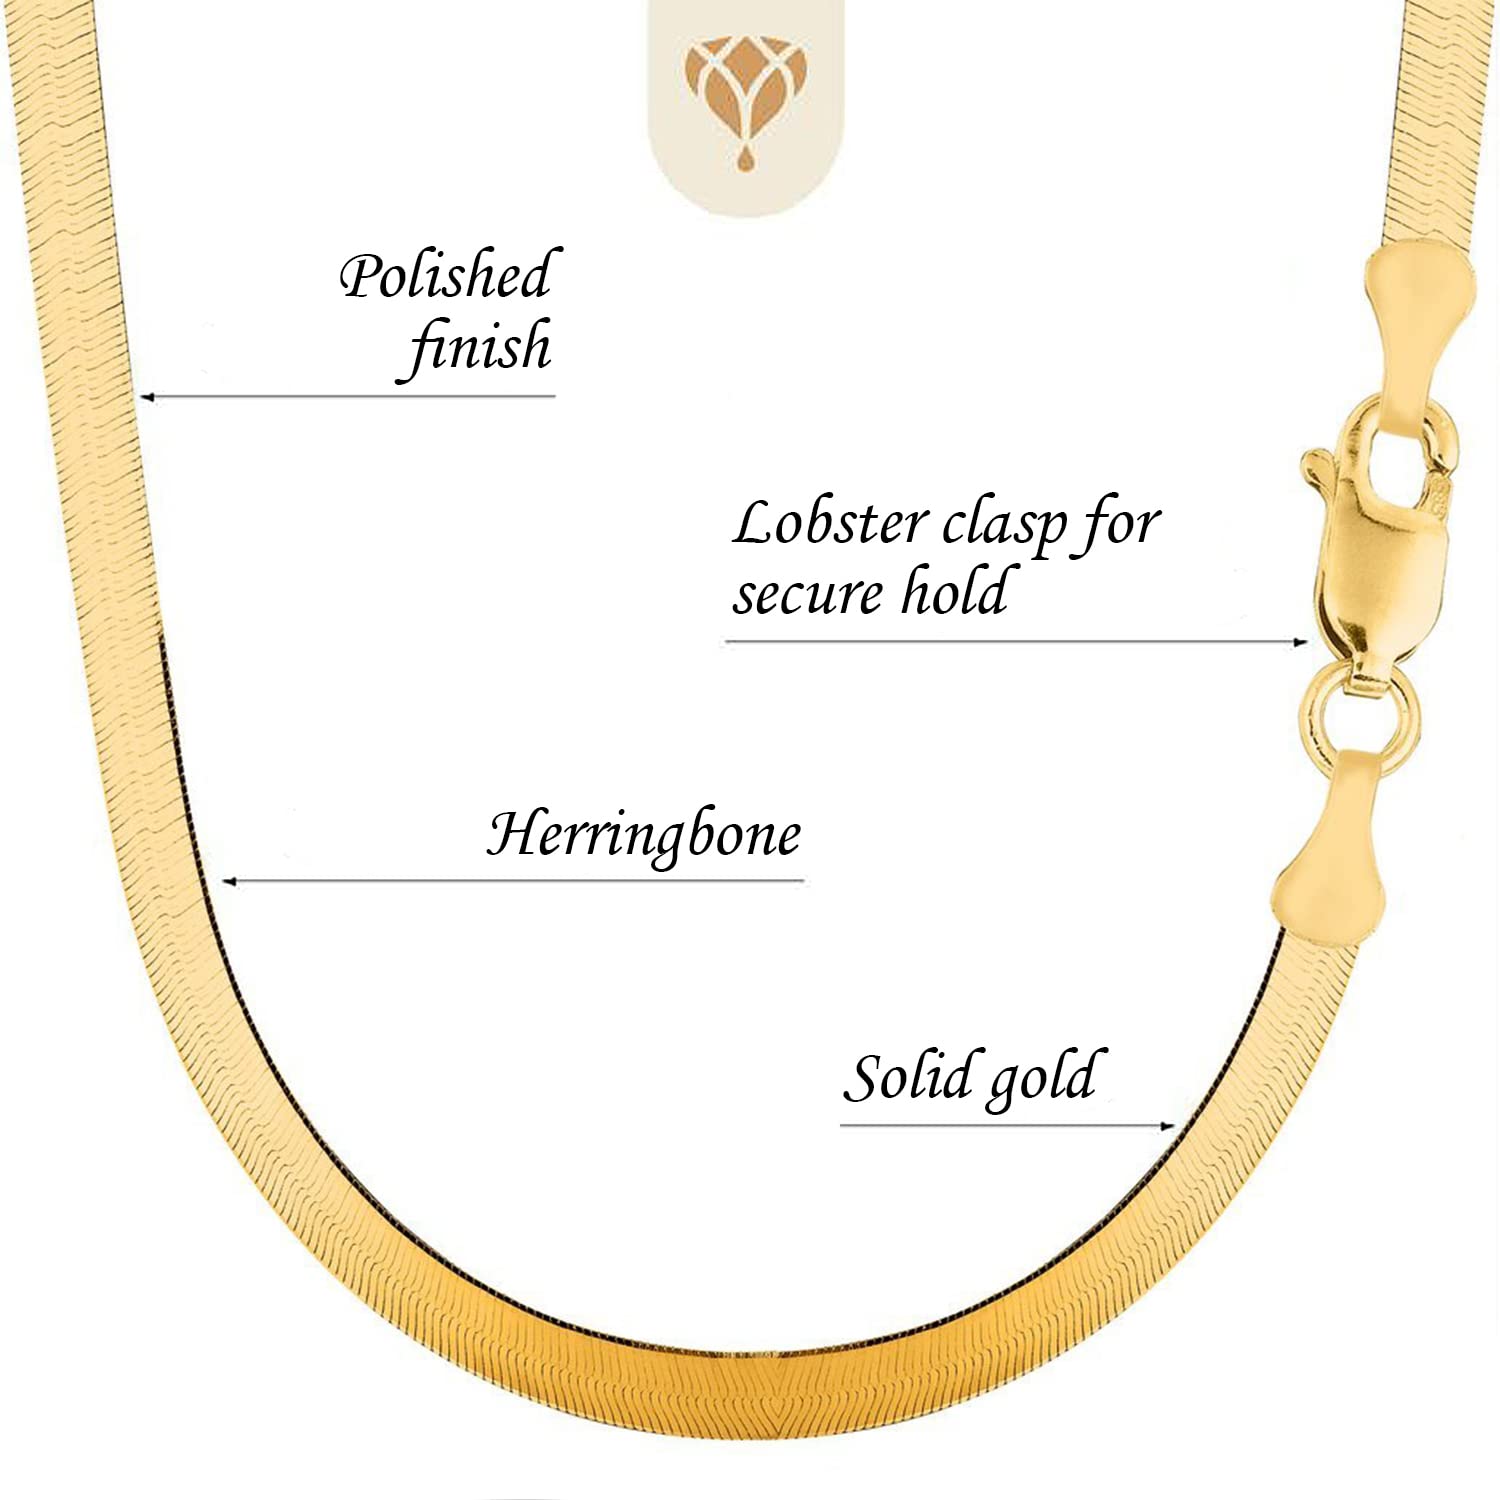 The Diamond Deal 14k Solid Yellow Gold 6.00mm Shiny Imperial Herringbone Chain Necklace or Bracelet for Pendants and Charms with Lobster-Claw Clasp (7